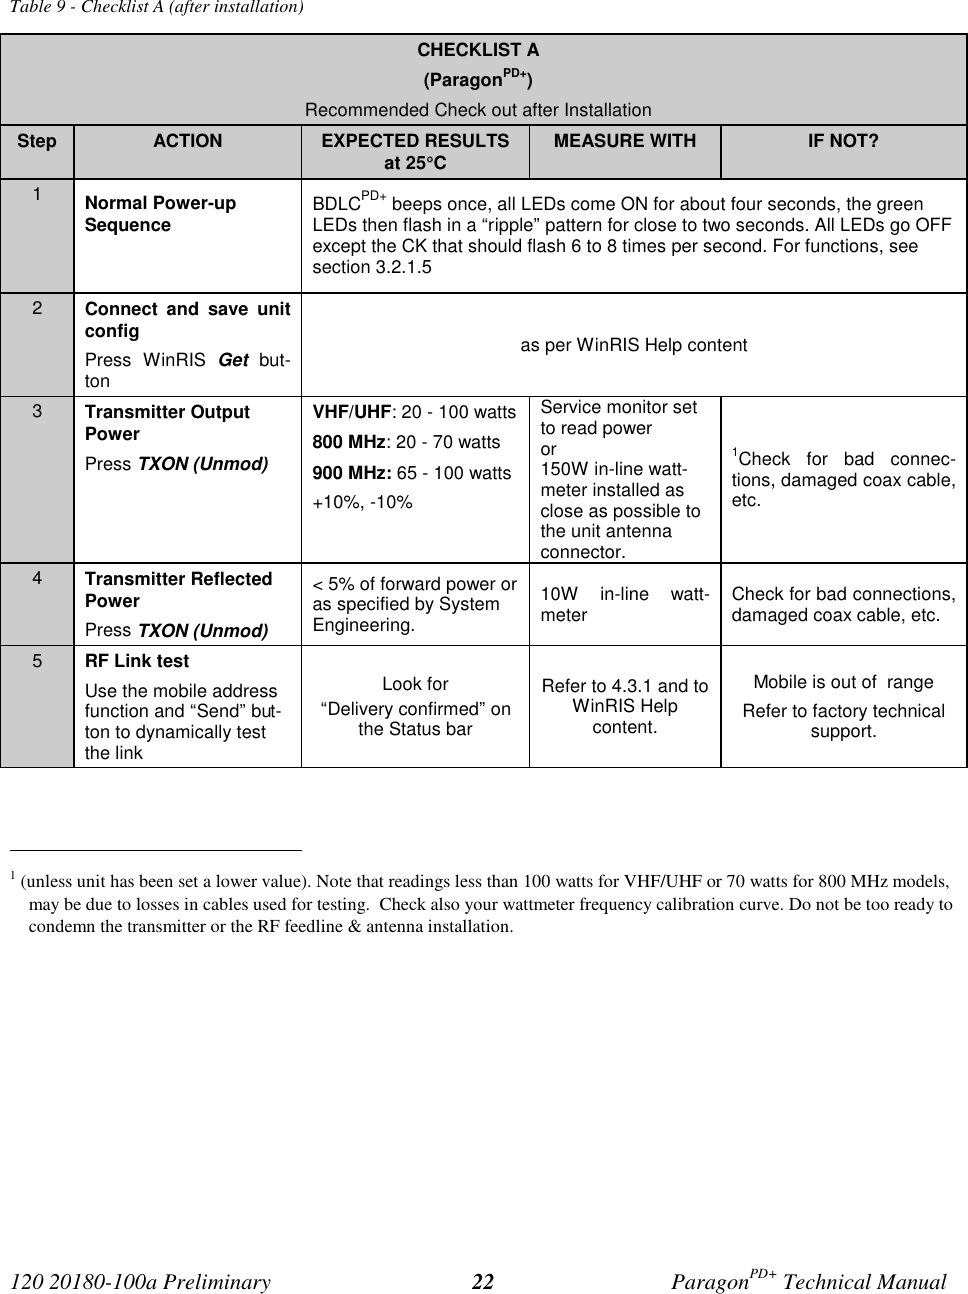 Page 29 of CalAmp Wireless Networks BDD4T85-1 Paragon/PD User Manual Parg PD  T100a Prelim